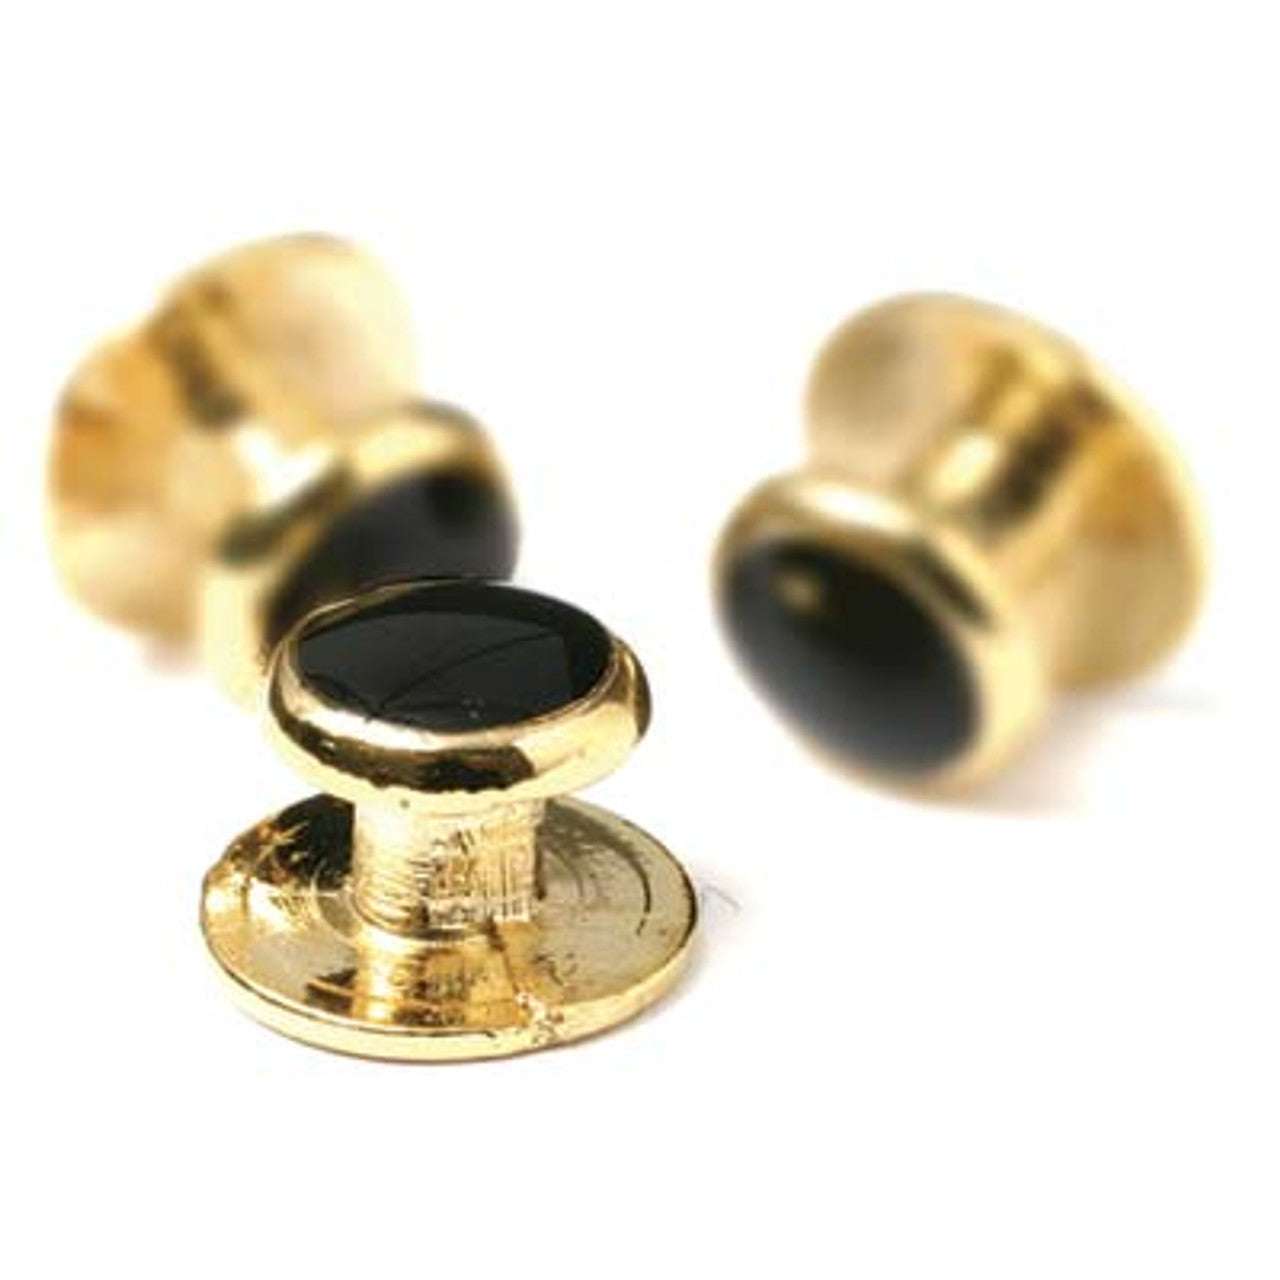 Look sharp and stylish with this set of 3 dress studs. They are perfect for any mess uniform and made with gold and black enamel for a polished look. With these dress studs, you'll be ready for any special event. www.moralepatches.com.au